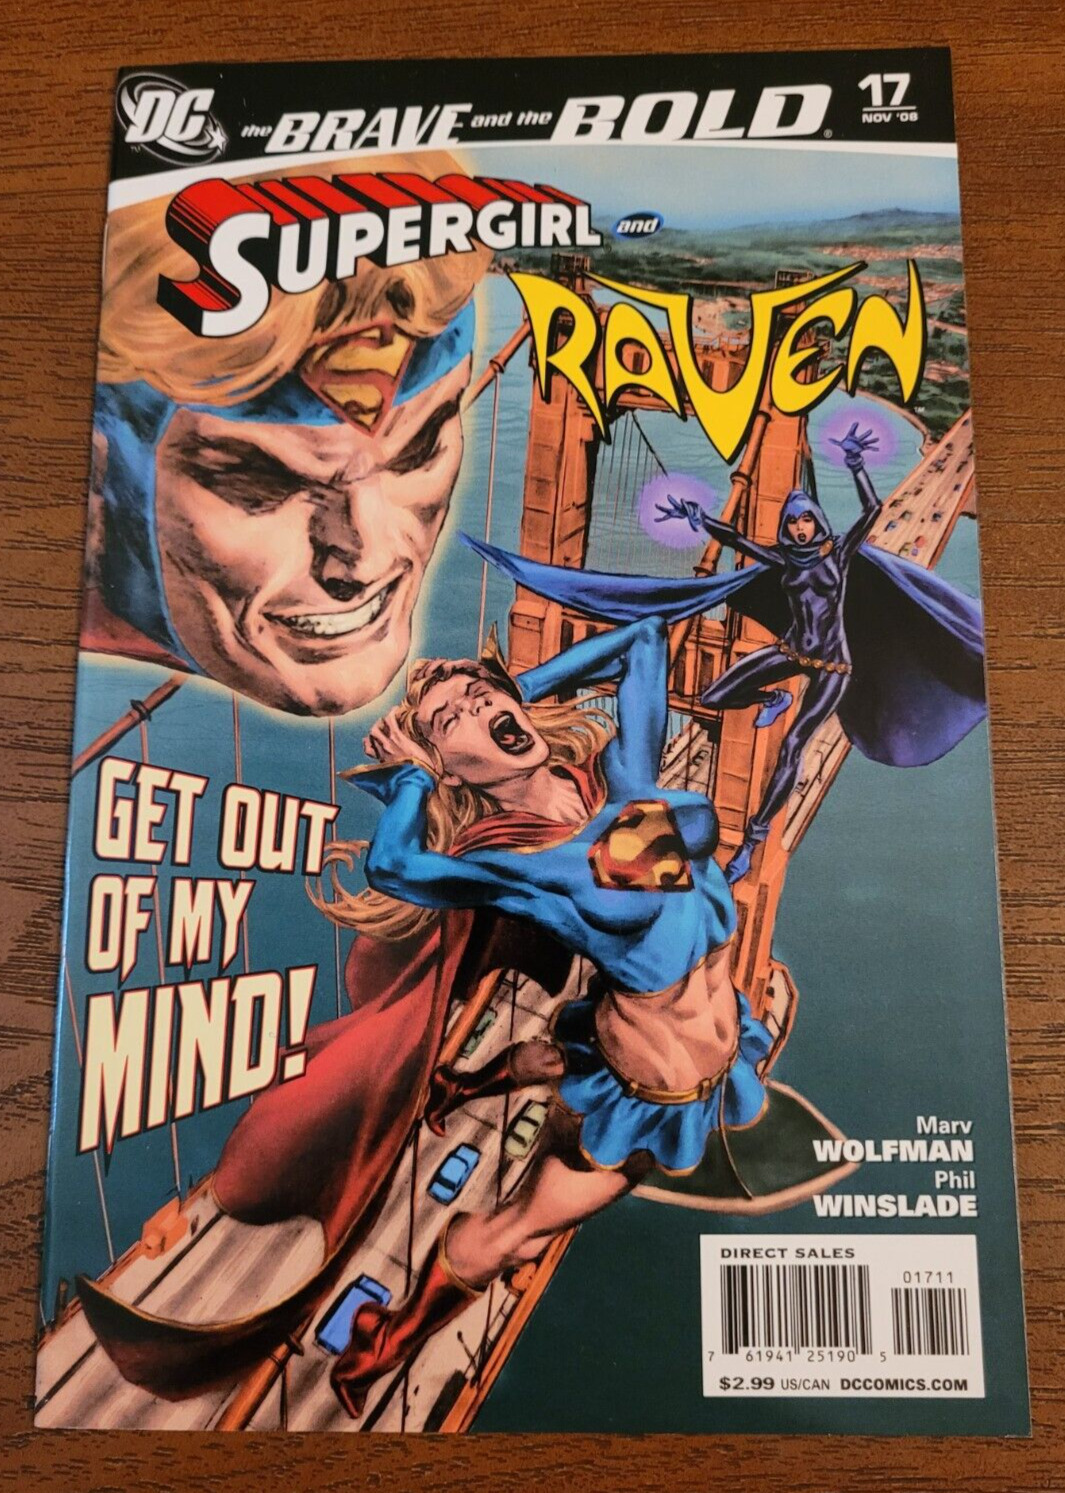 The Brave and The Bold #17 - Supergirl and Raven - Fathers Part 1 -November 2008